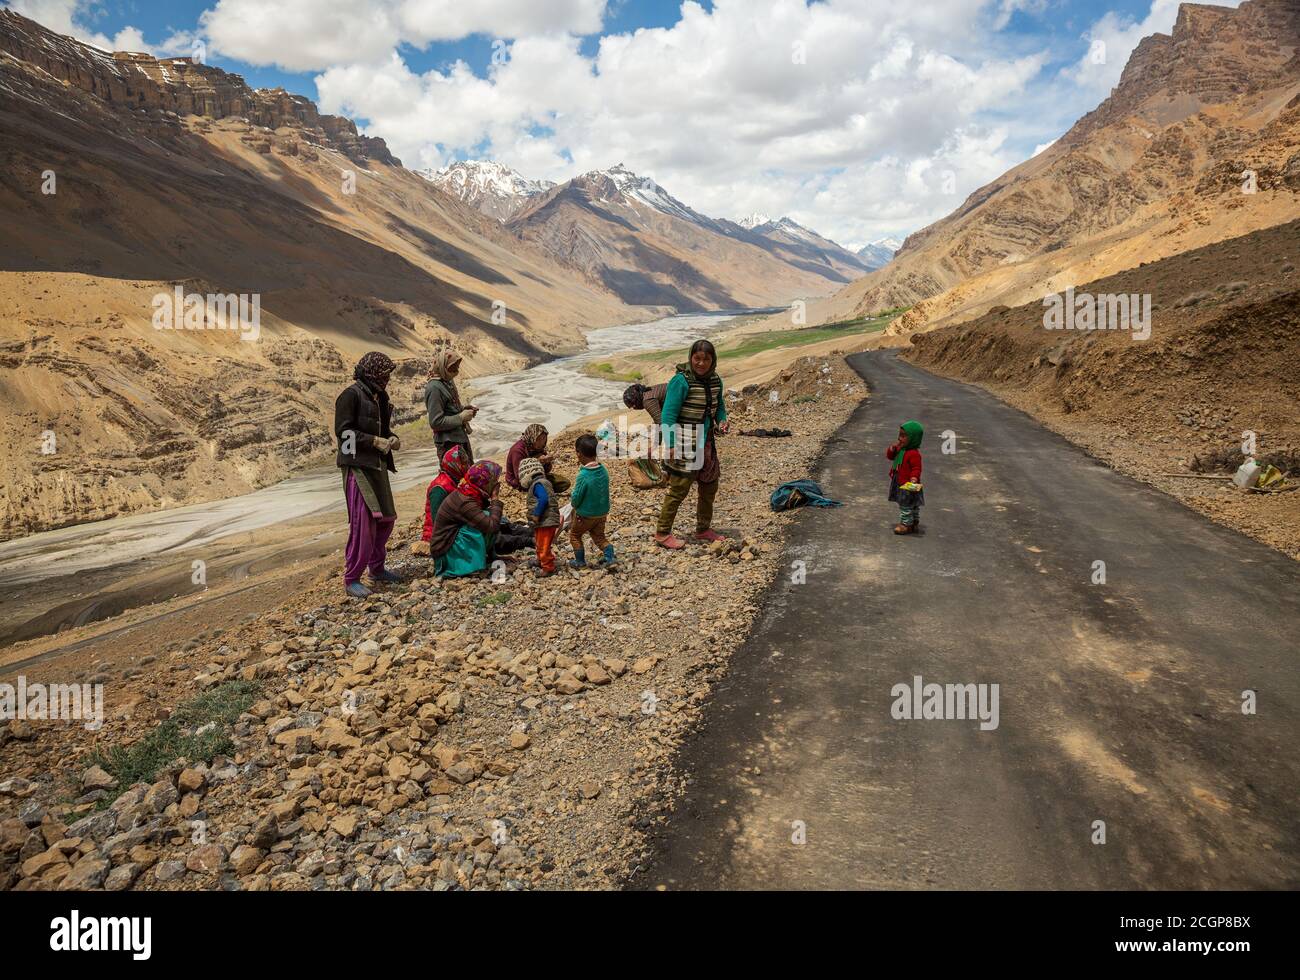 Working people at road construction site in high altitudes of trans himalayan mountain range in Spiti valley, Himachal Pradesh, India Stock Photo